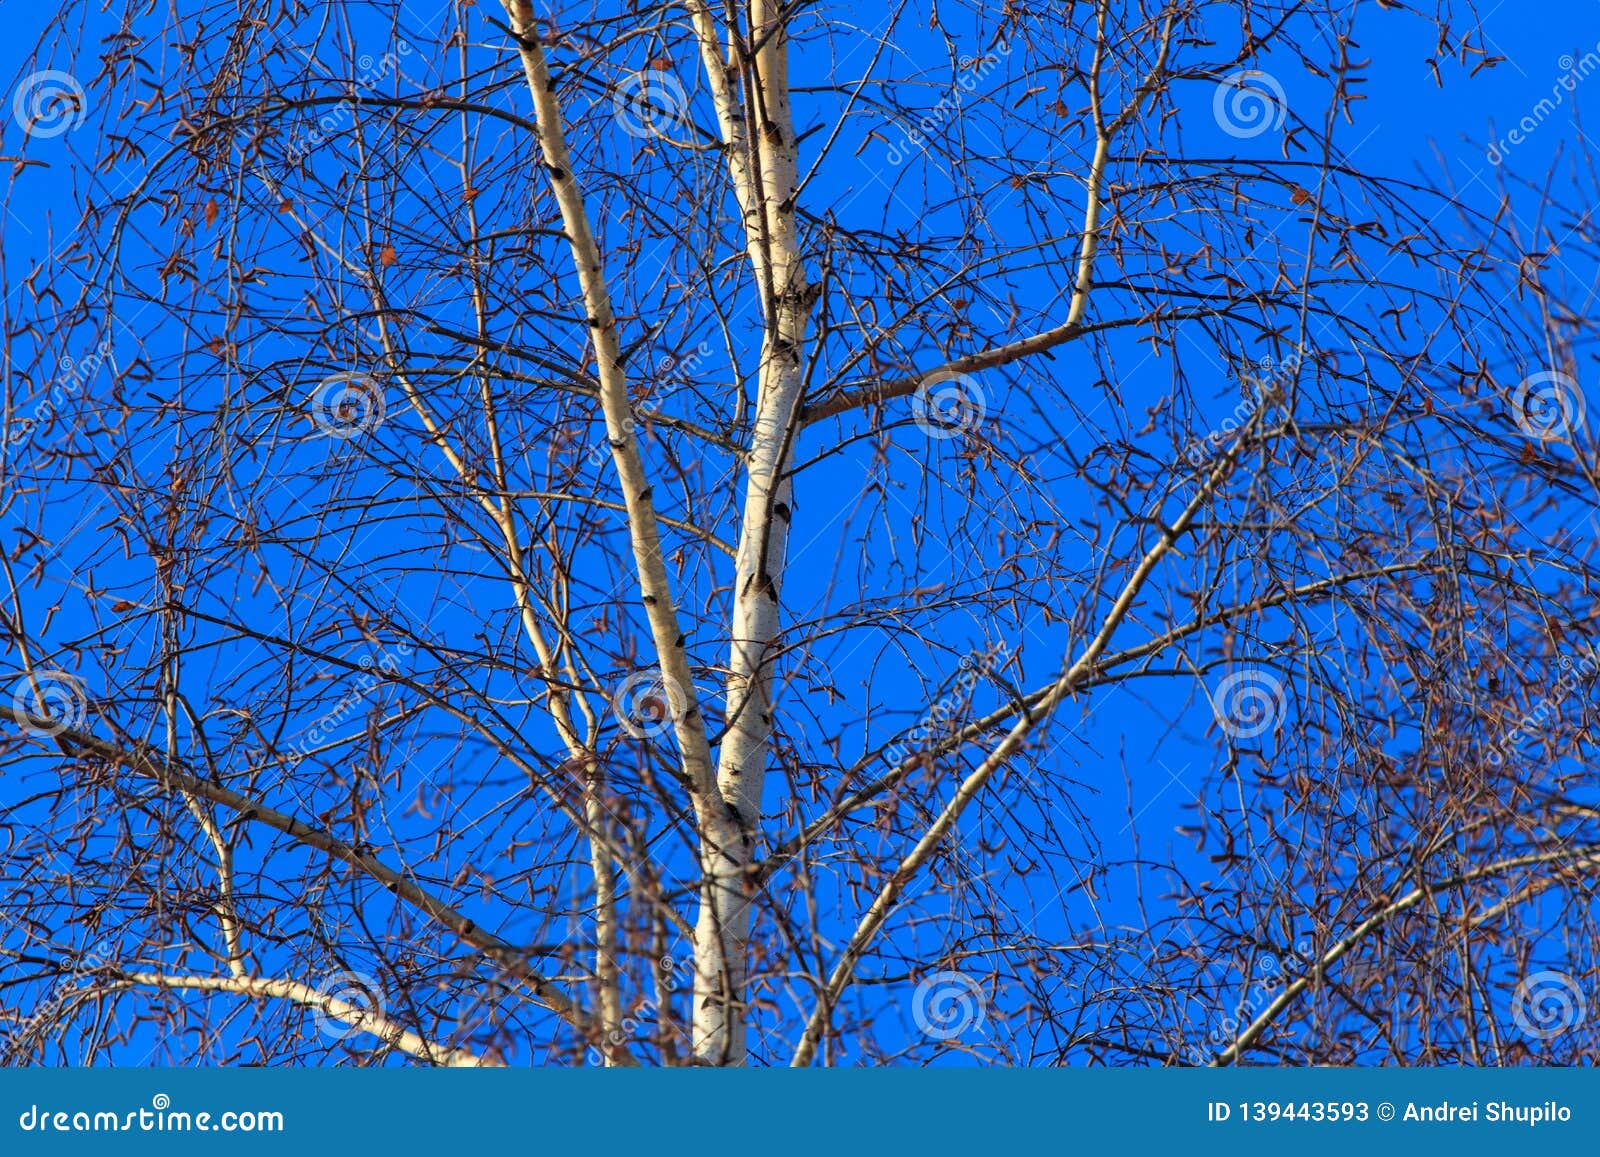 Naked Birch Trees In Heavy Mist In Countryside Stock Photo 